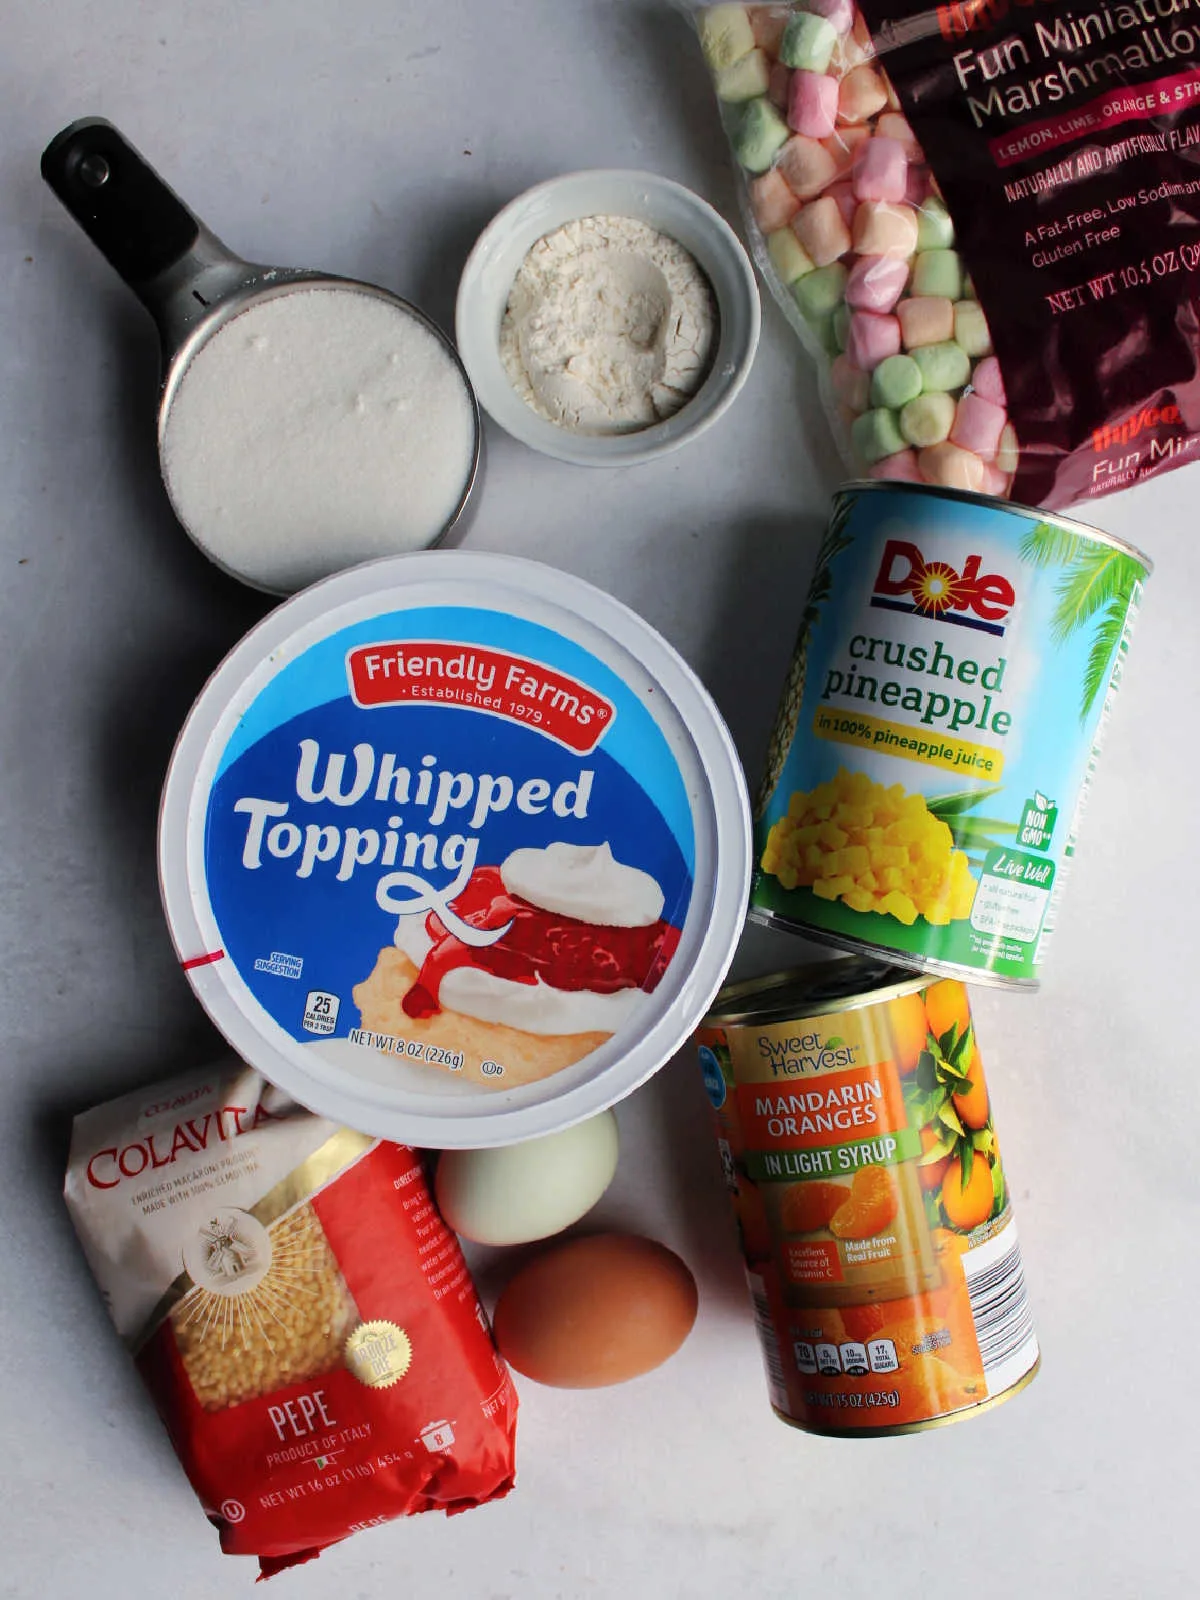 Ingredients including pepe pasta, eggs, crushed pineapple, sugar, flour, pastel marshmallows and a can of mandarin oranges ready to be made into easter frog egg salad.